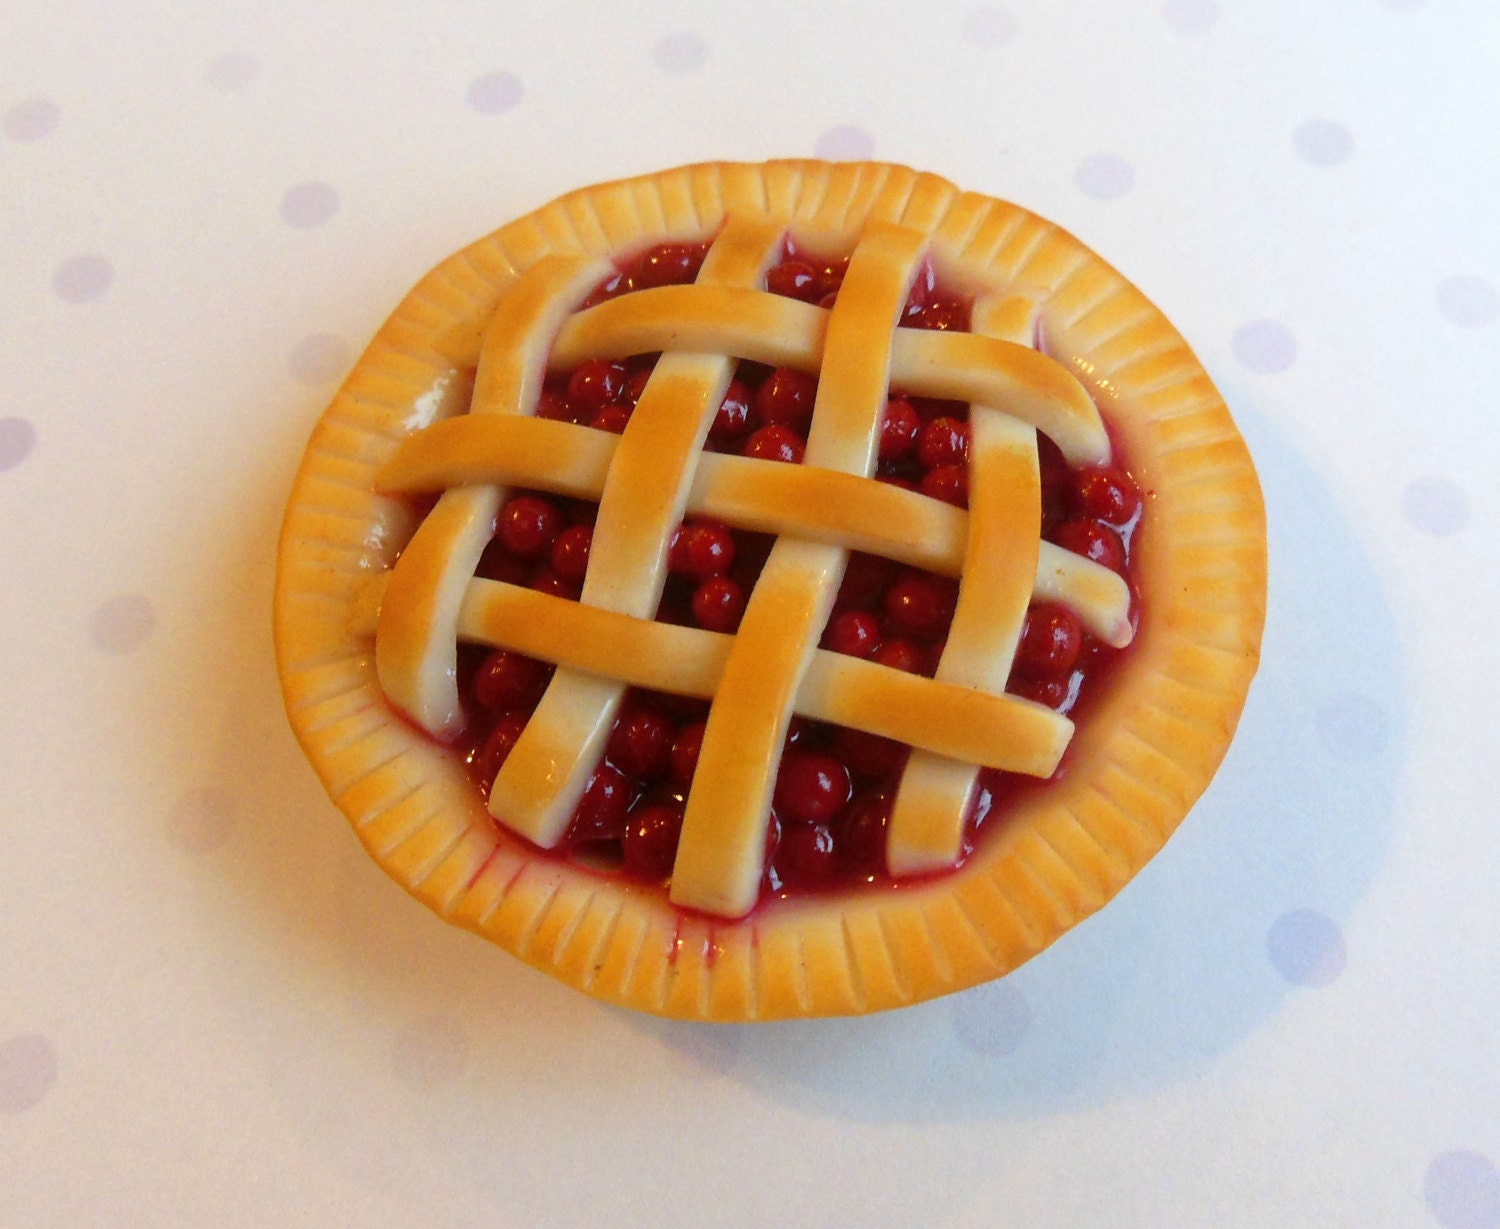 polymer clay cherry pie magnet by ScrumptiousDoodle on Etsy